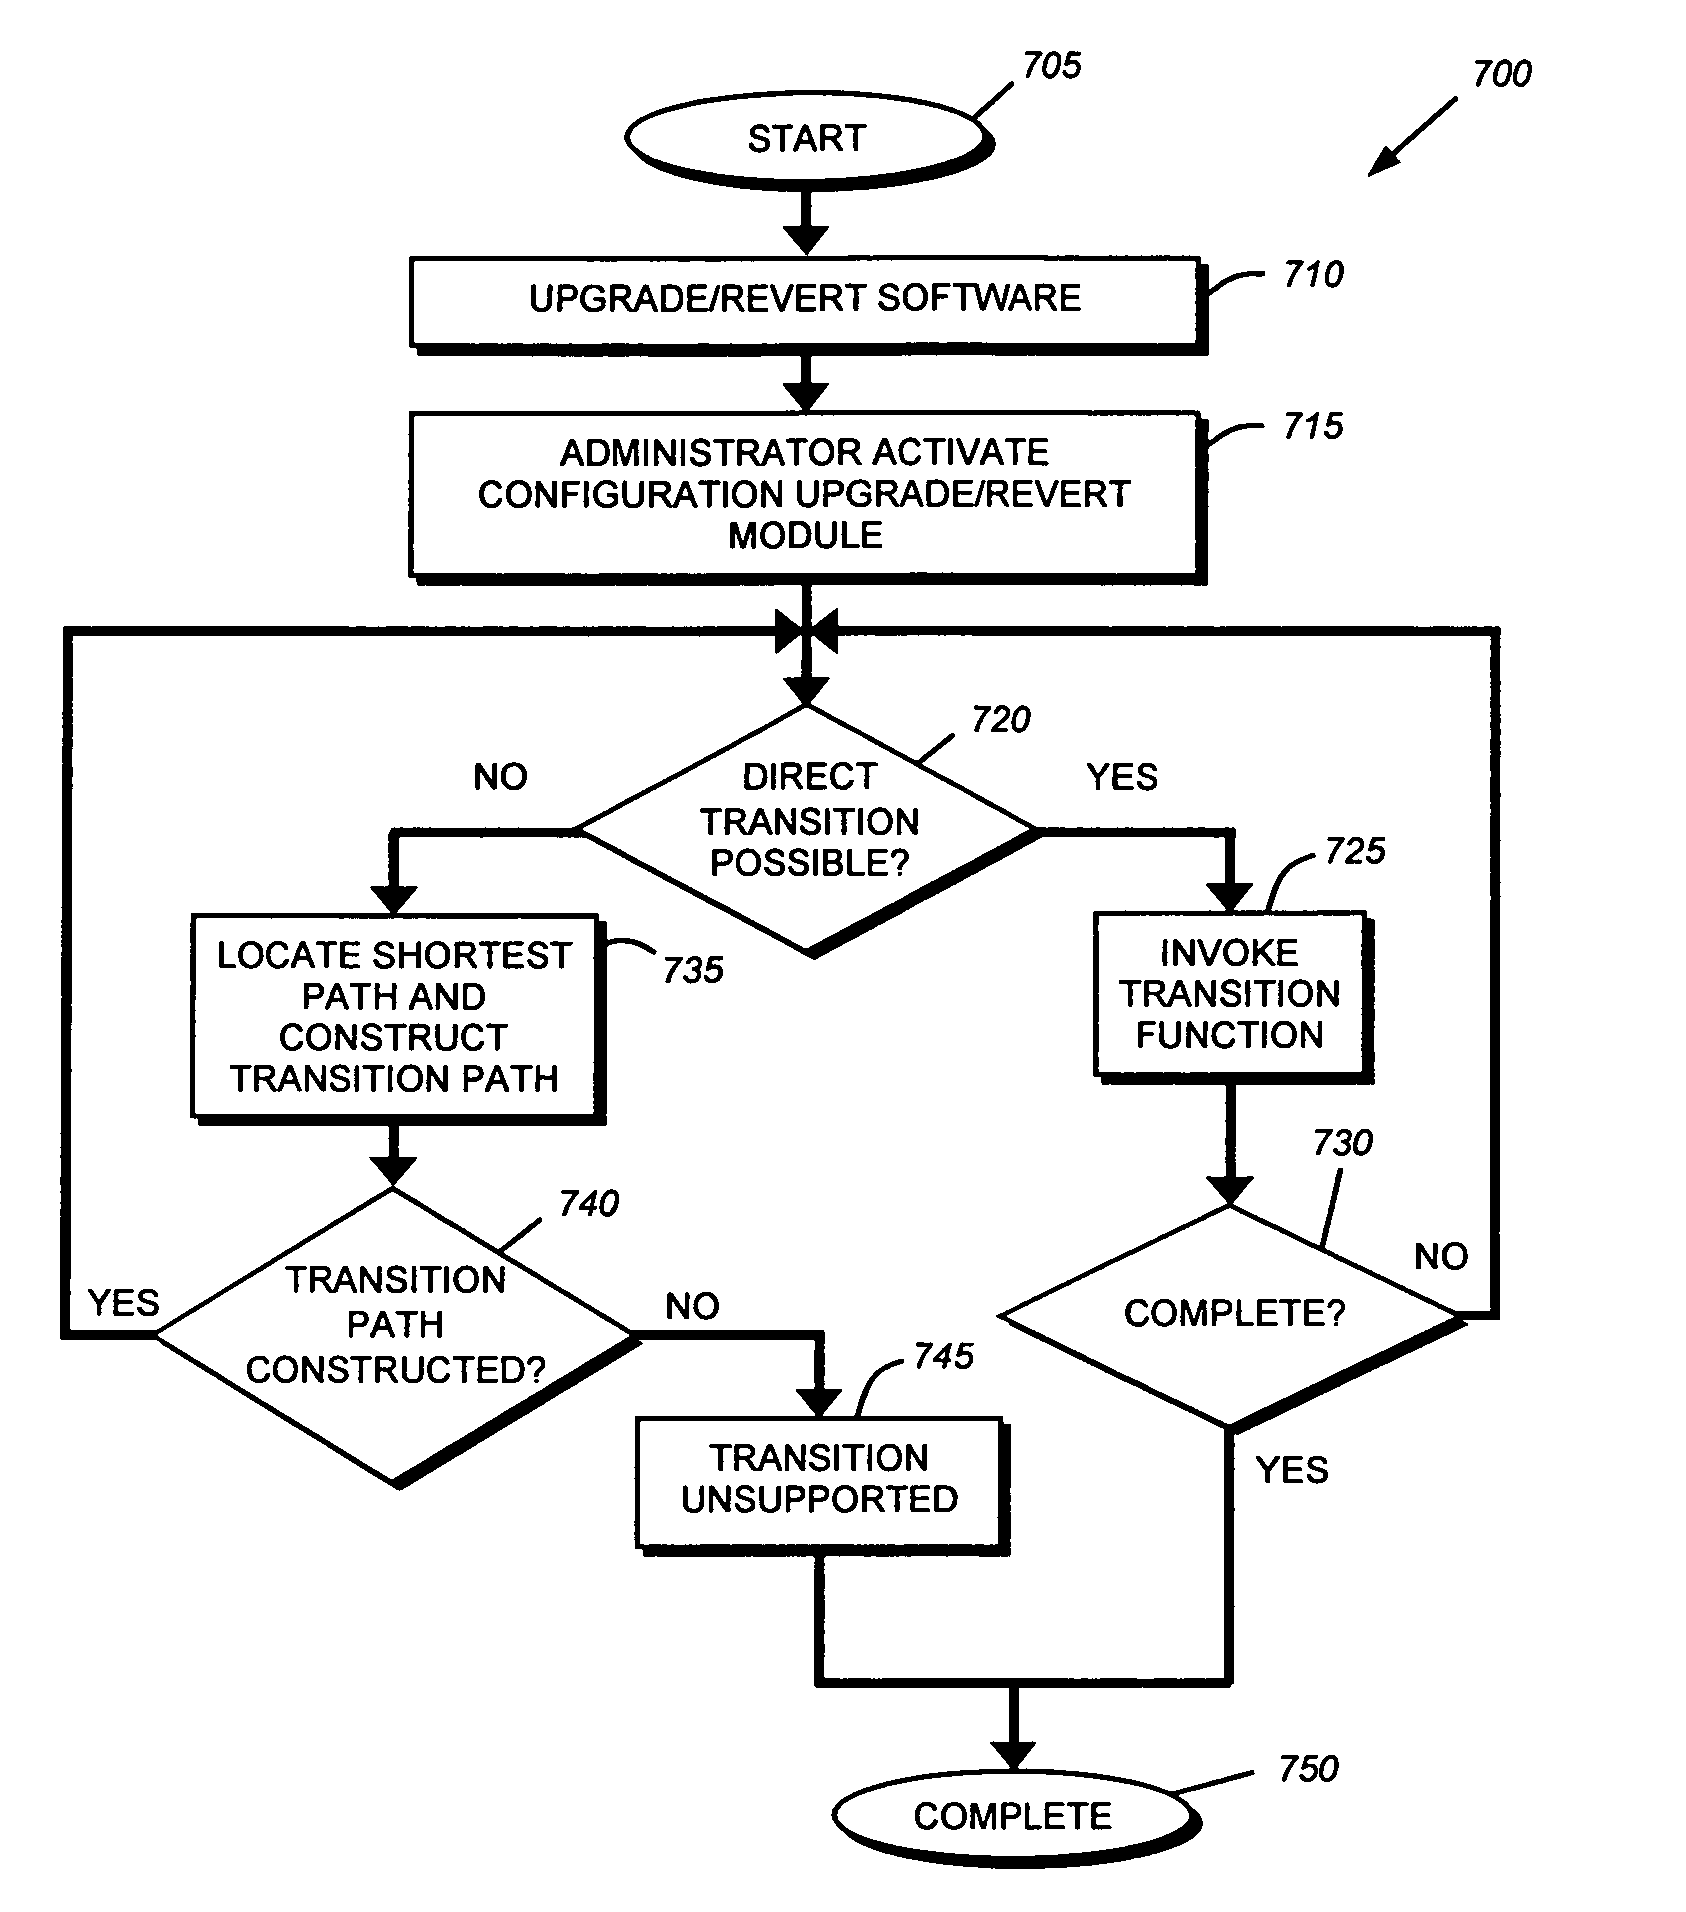 System and method for automatically upgrading/reverting configurations across a plurality of product release lines